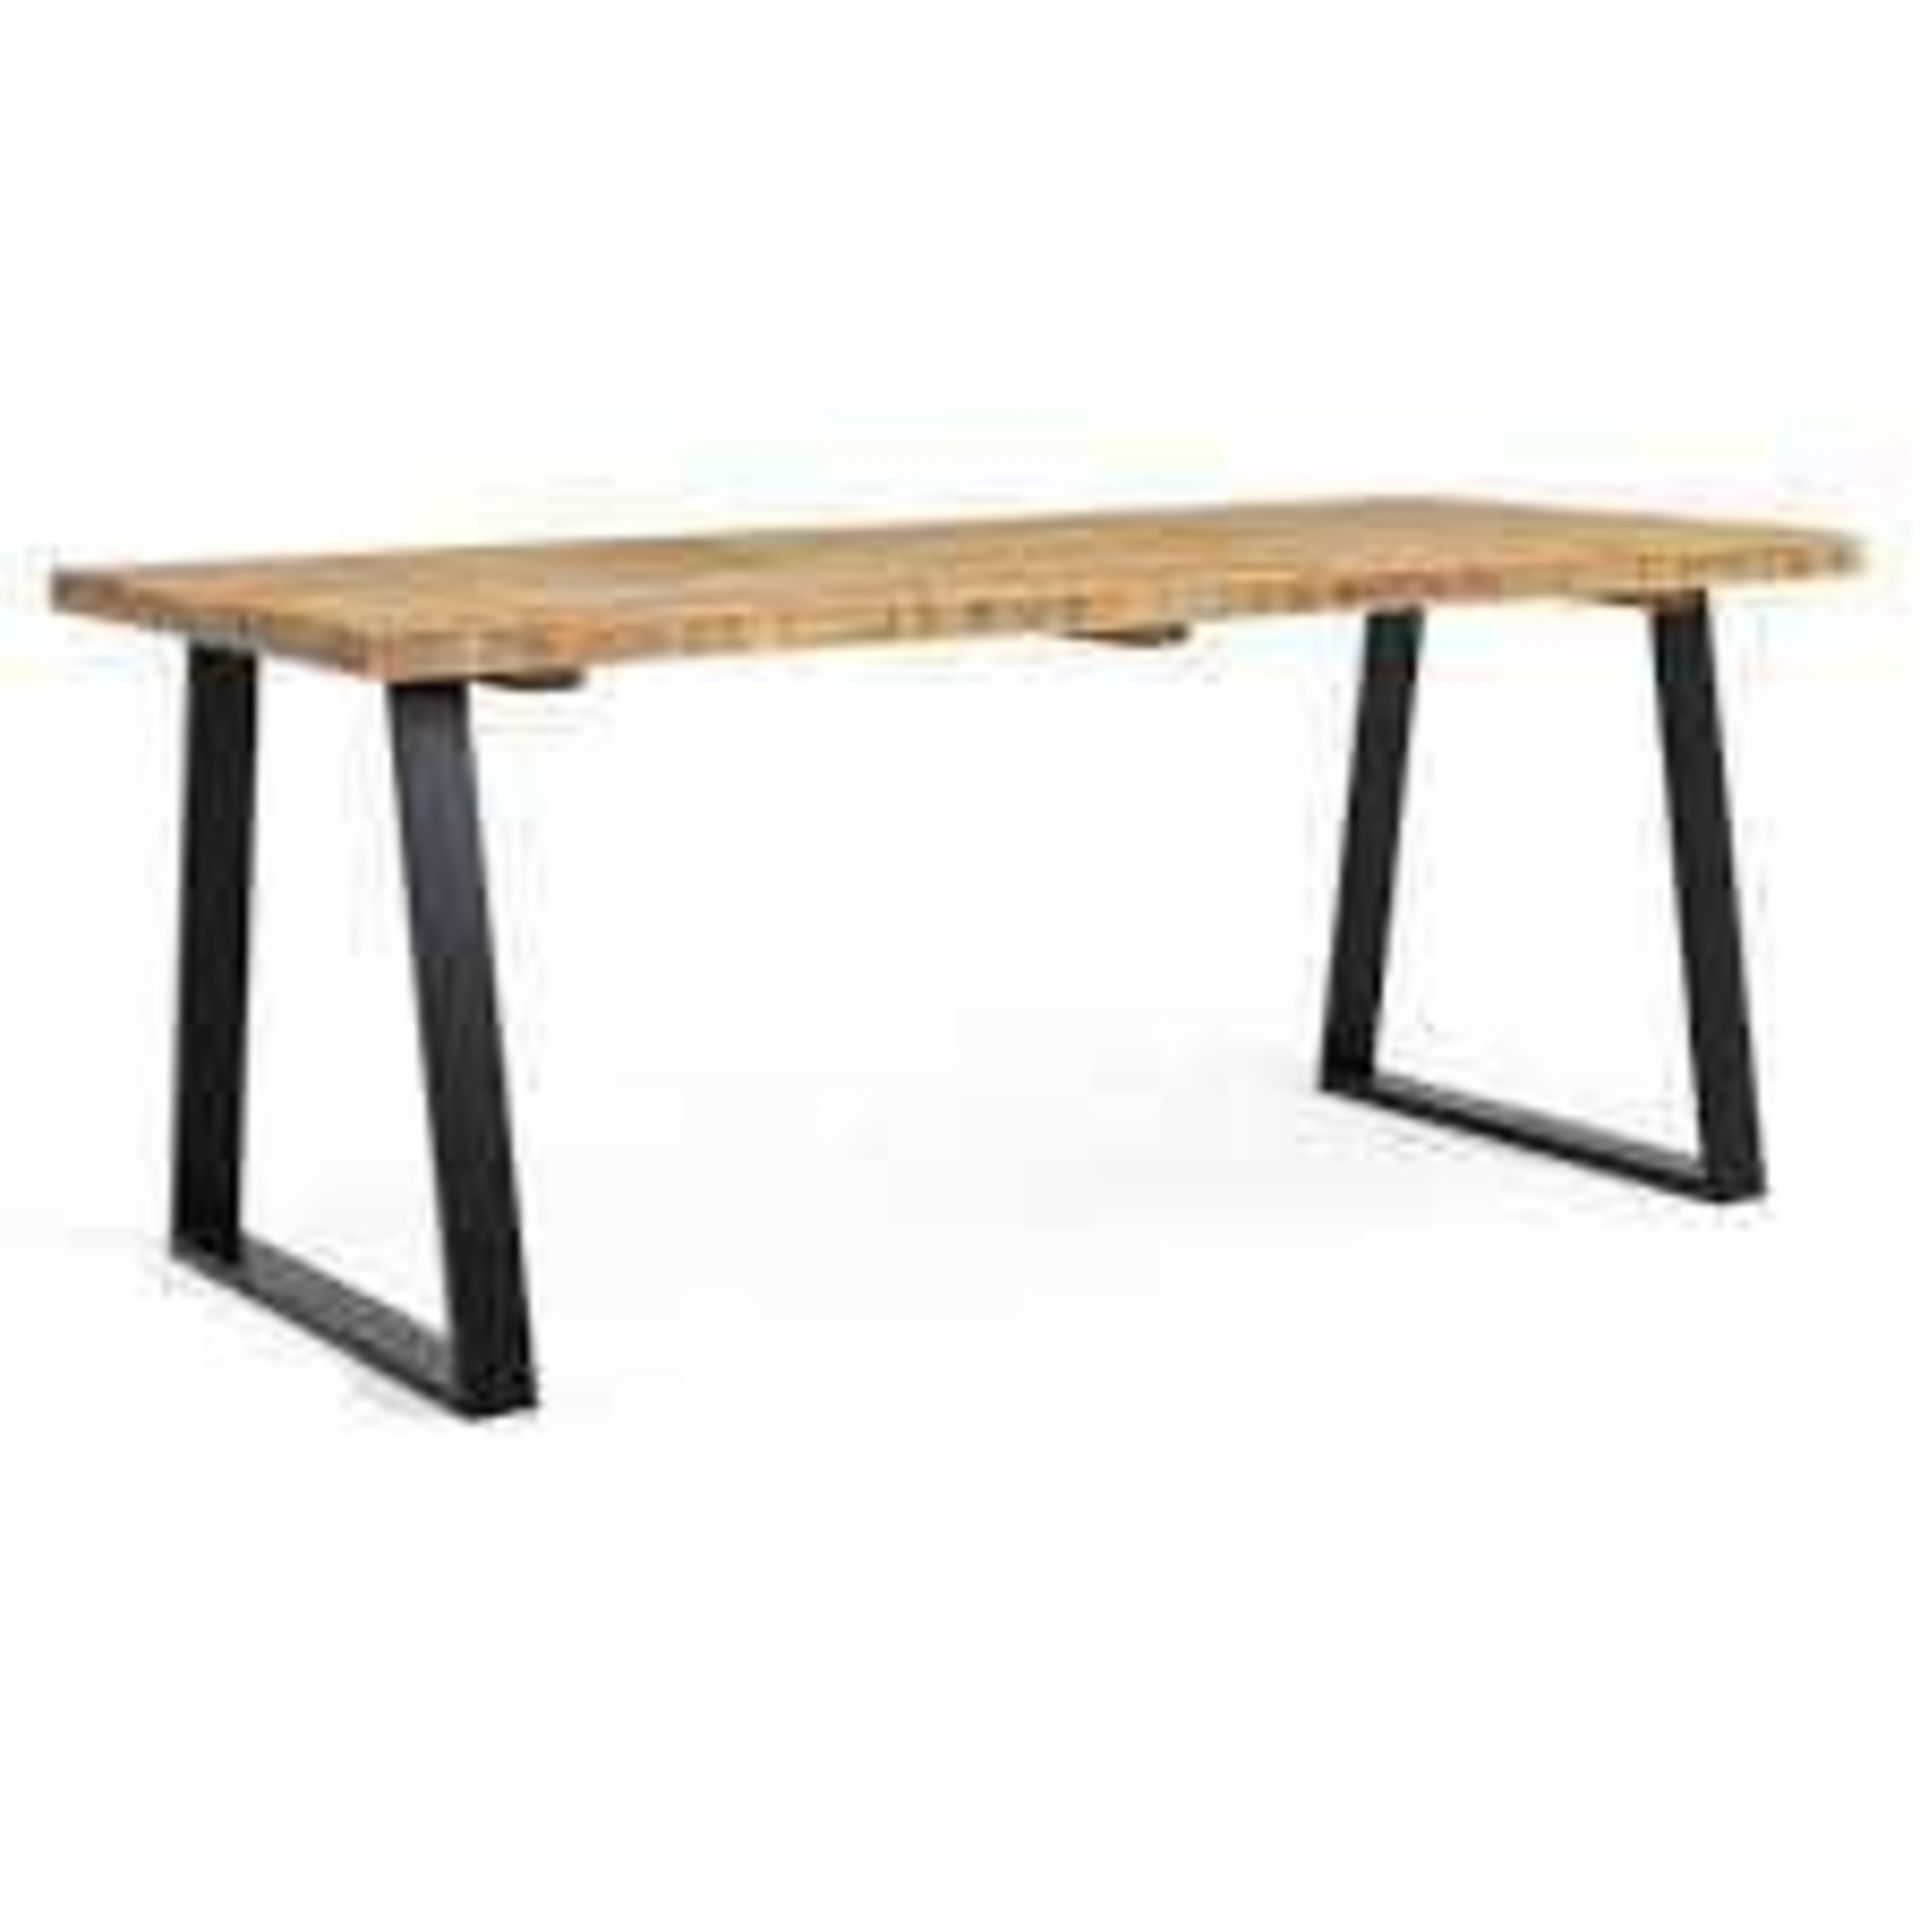 RRP £750 Calia Solid Oak Large 6-8 Seater Dining Table (1 leaf) (no tag id)(MK)